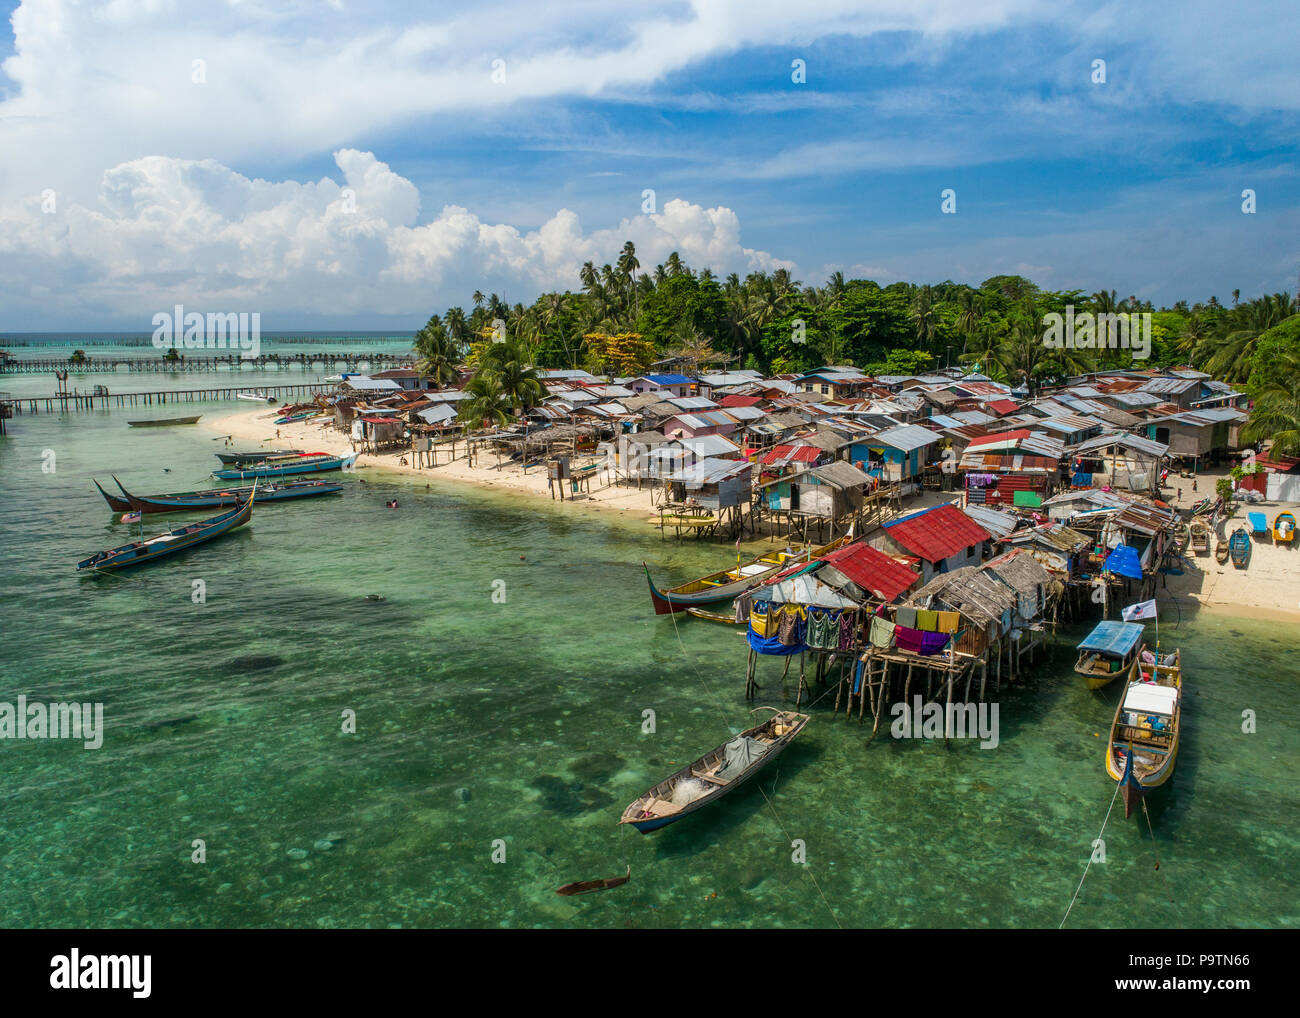 A drone photo of a very poor Bajau sea gypsy village on Mabul Island, Sabah, Malaysia (Borneo), with blue sky and clouds in the background. Stock Photo